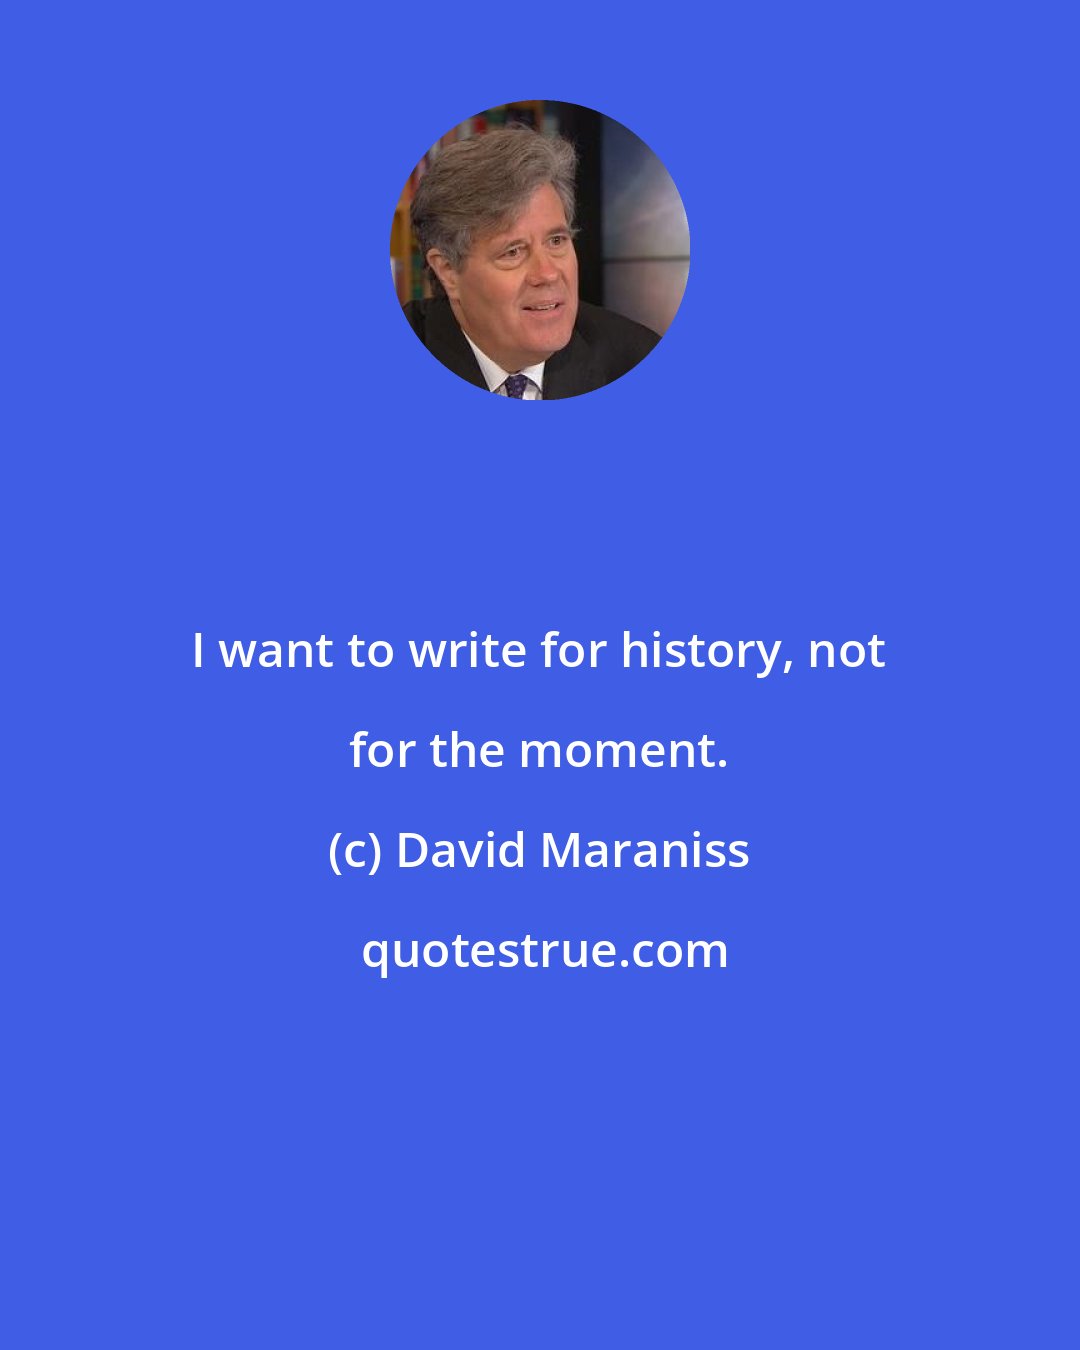 David Maraniss: I want to write for history, not for the moment.